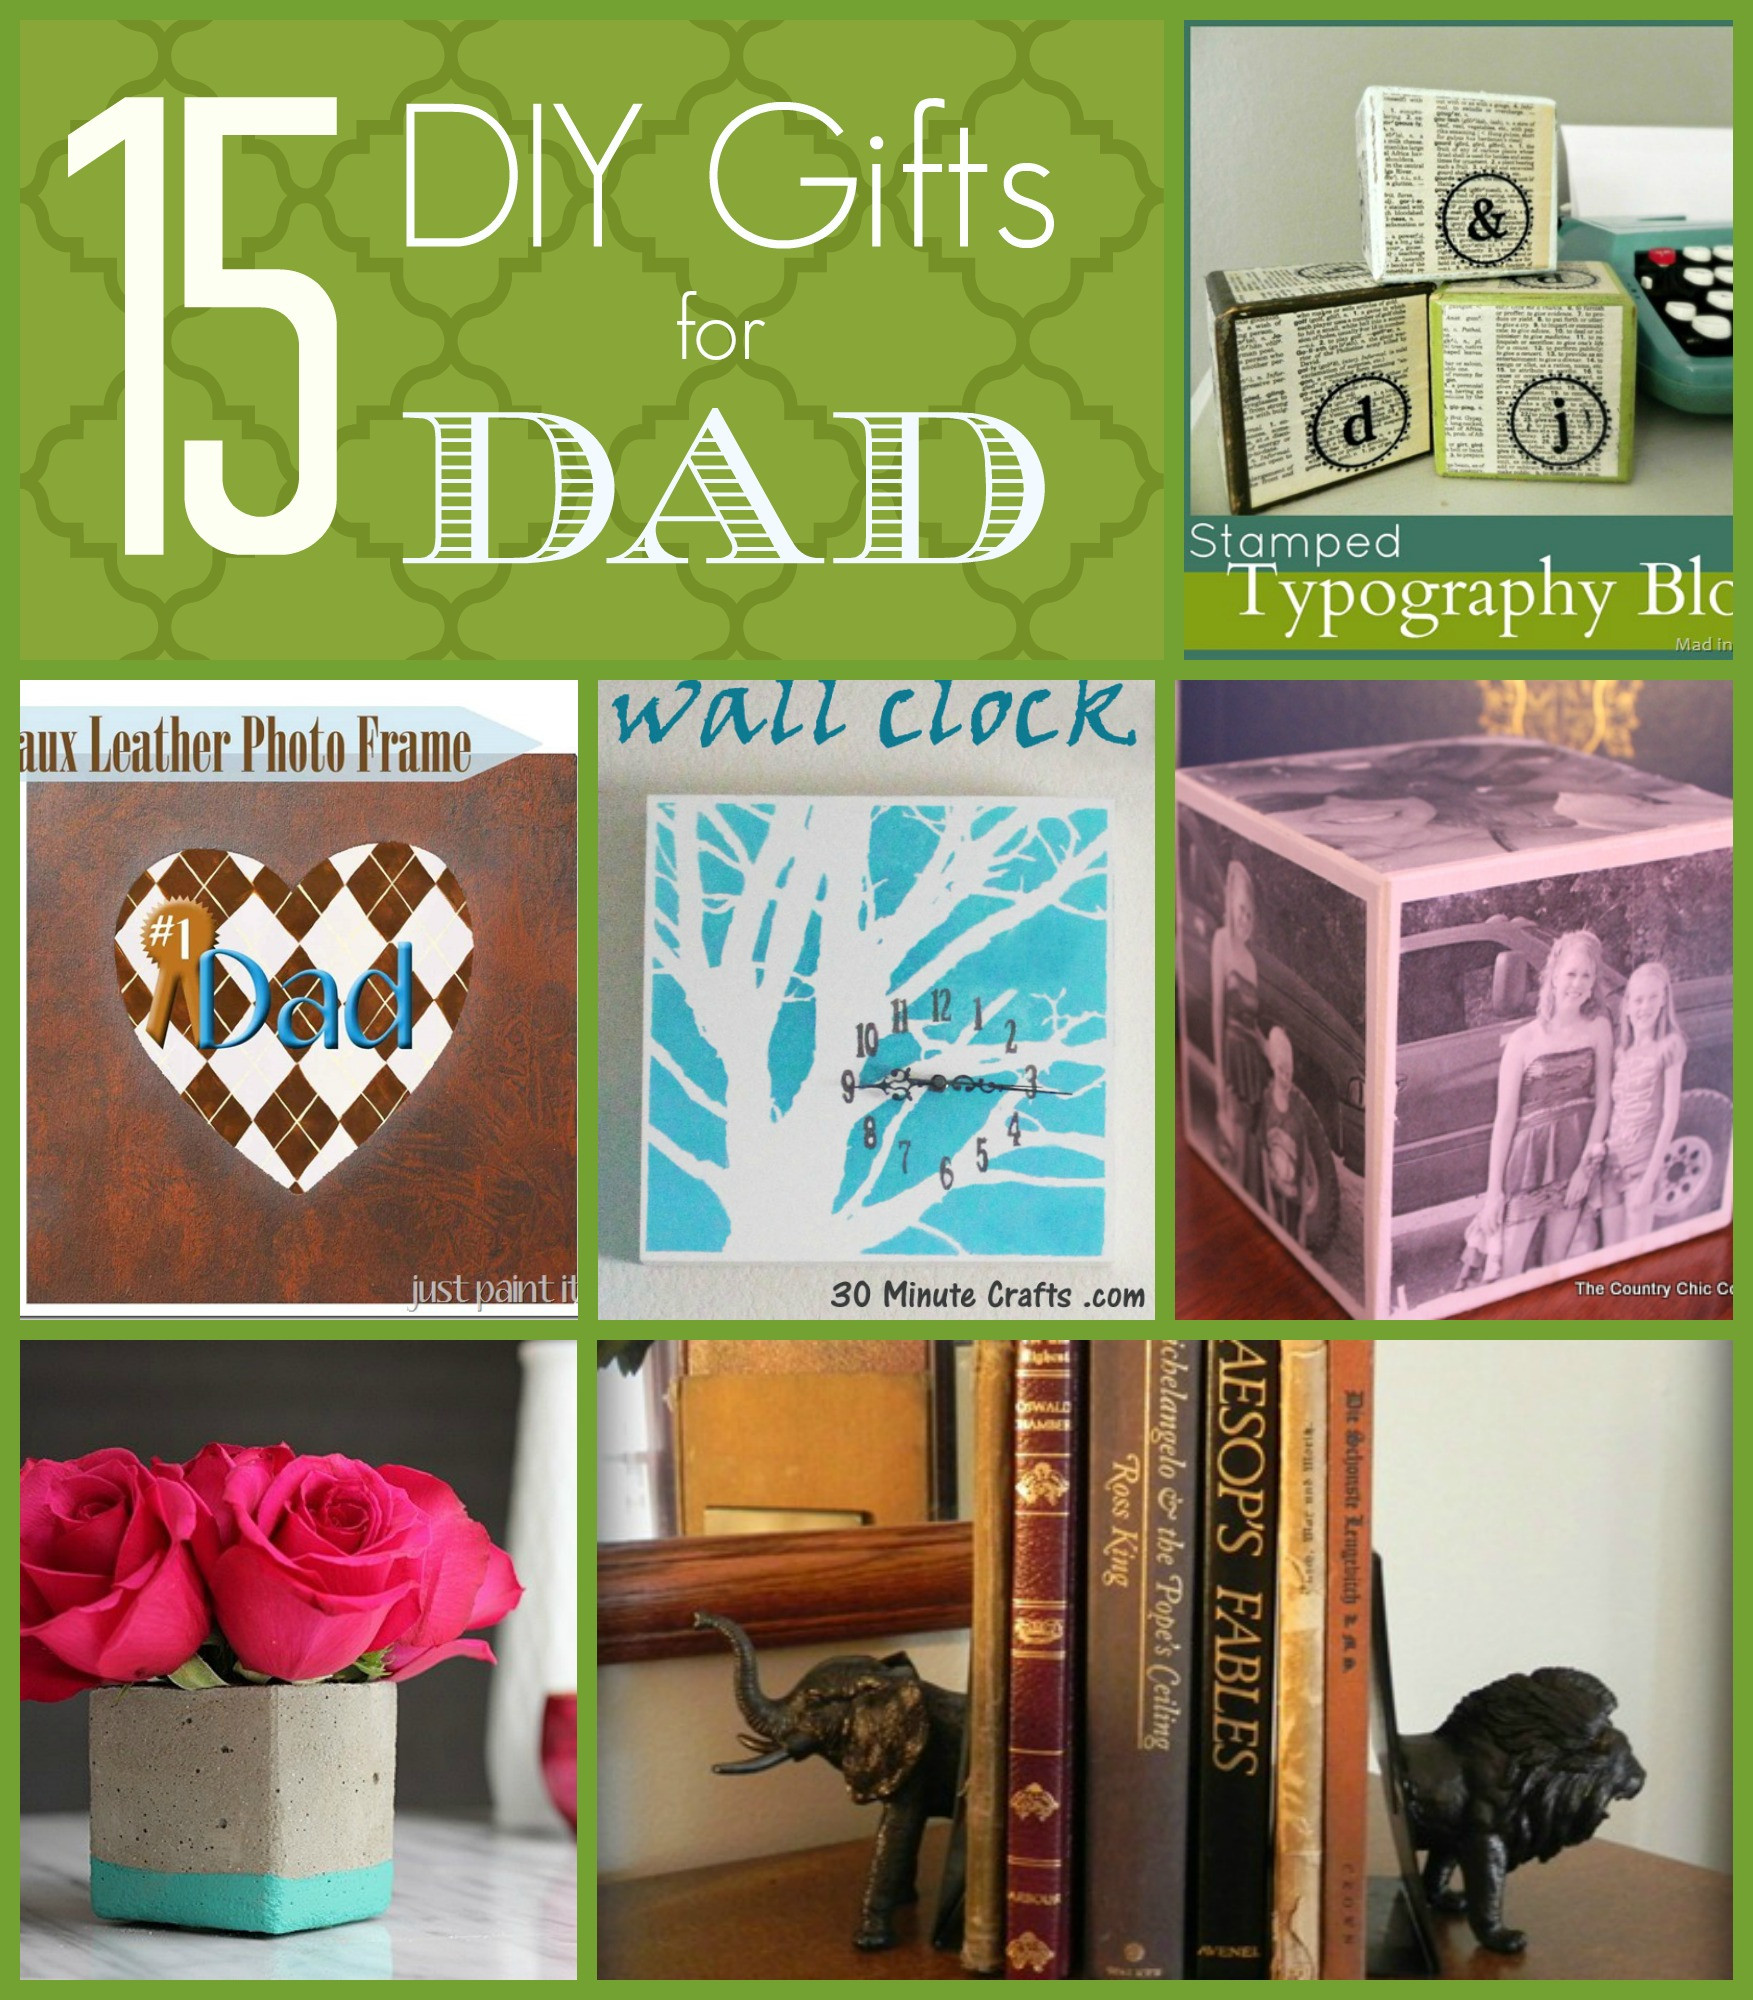 DIY Gift For Dad Christmas
 15 DIY Gift Ideas for Dad Just Paint It Blog